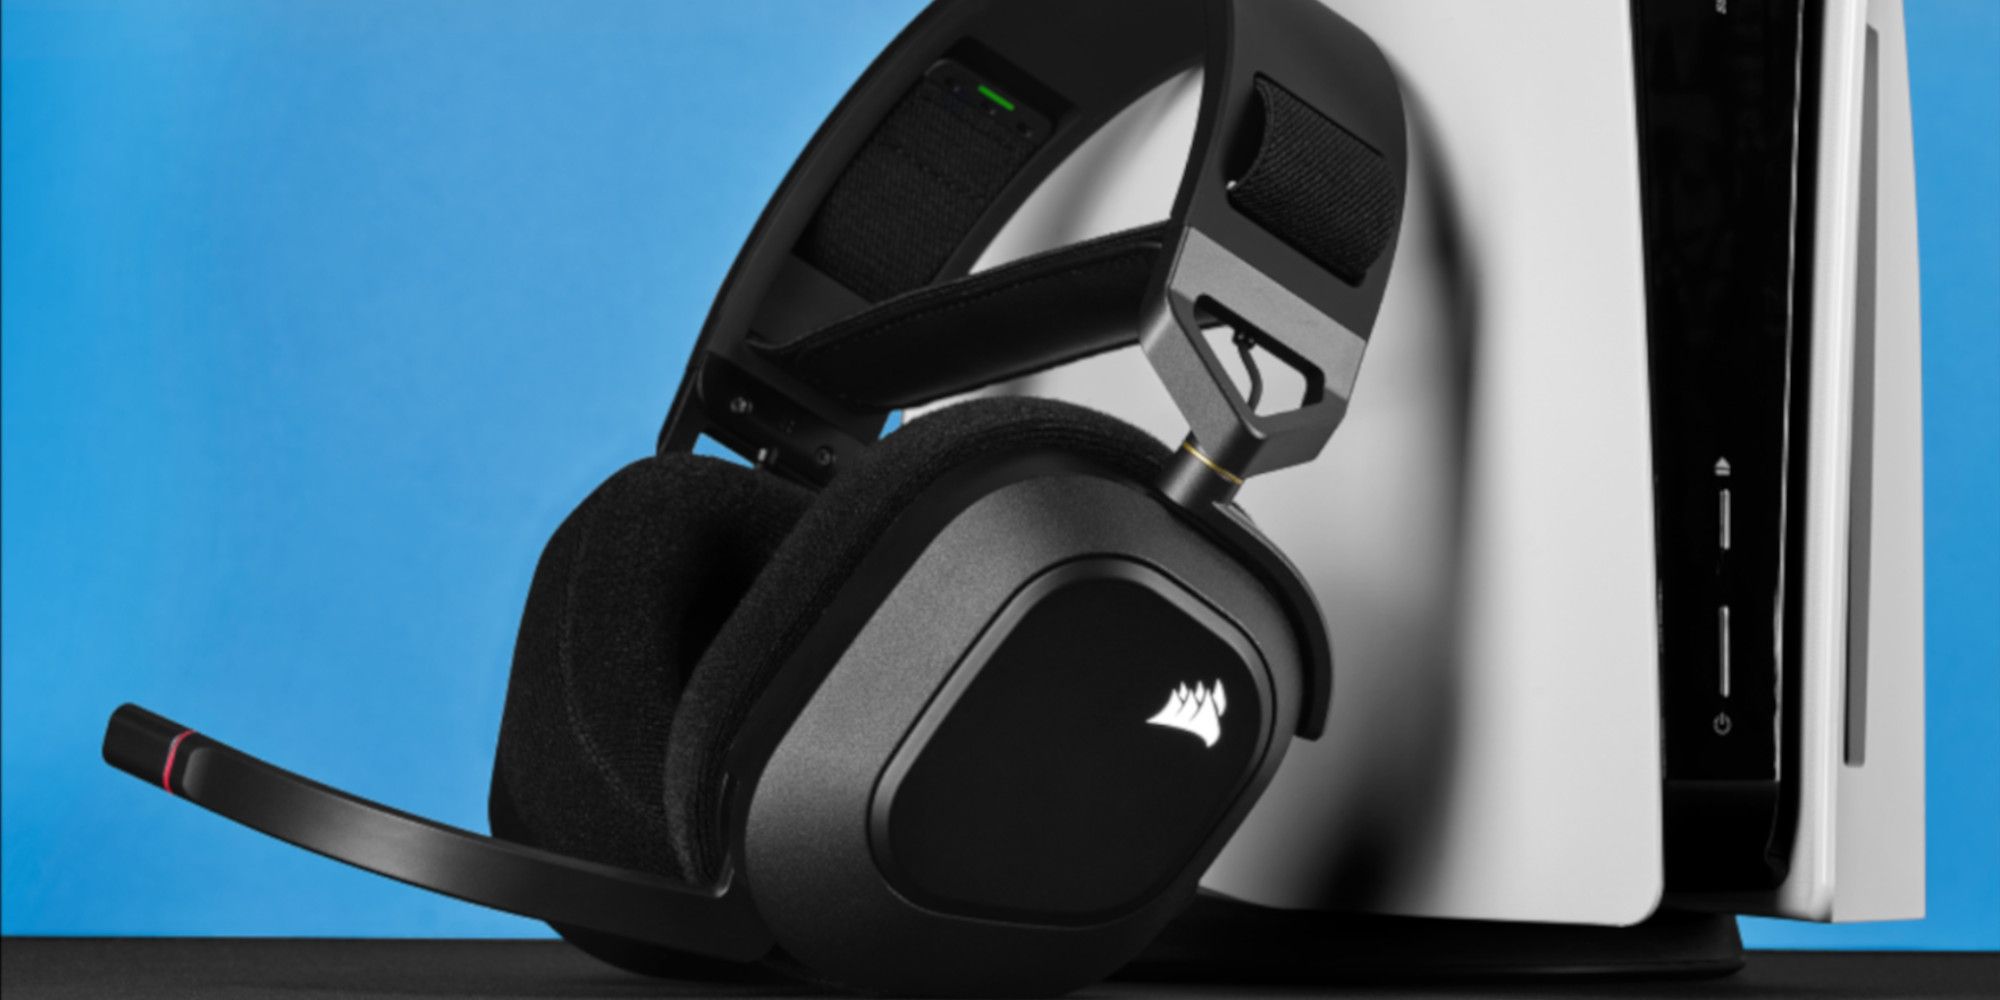 YOU GOTTA SEE THIS!! Corsair HS80 Wireless Gaming Headset Review 